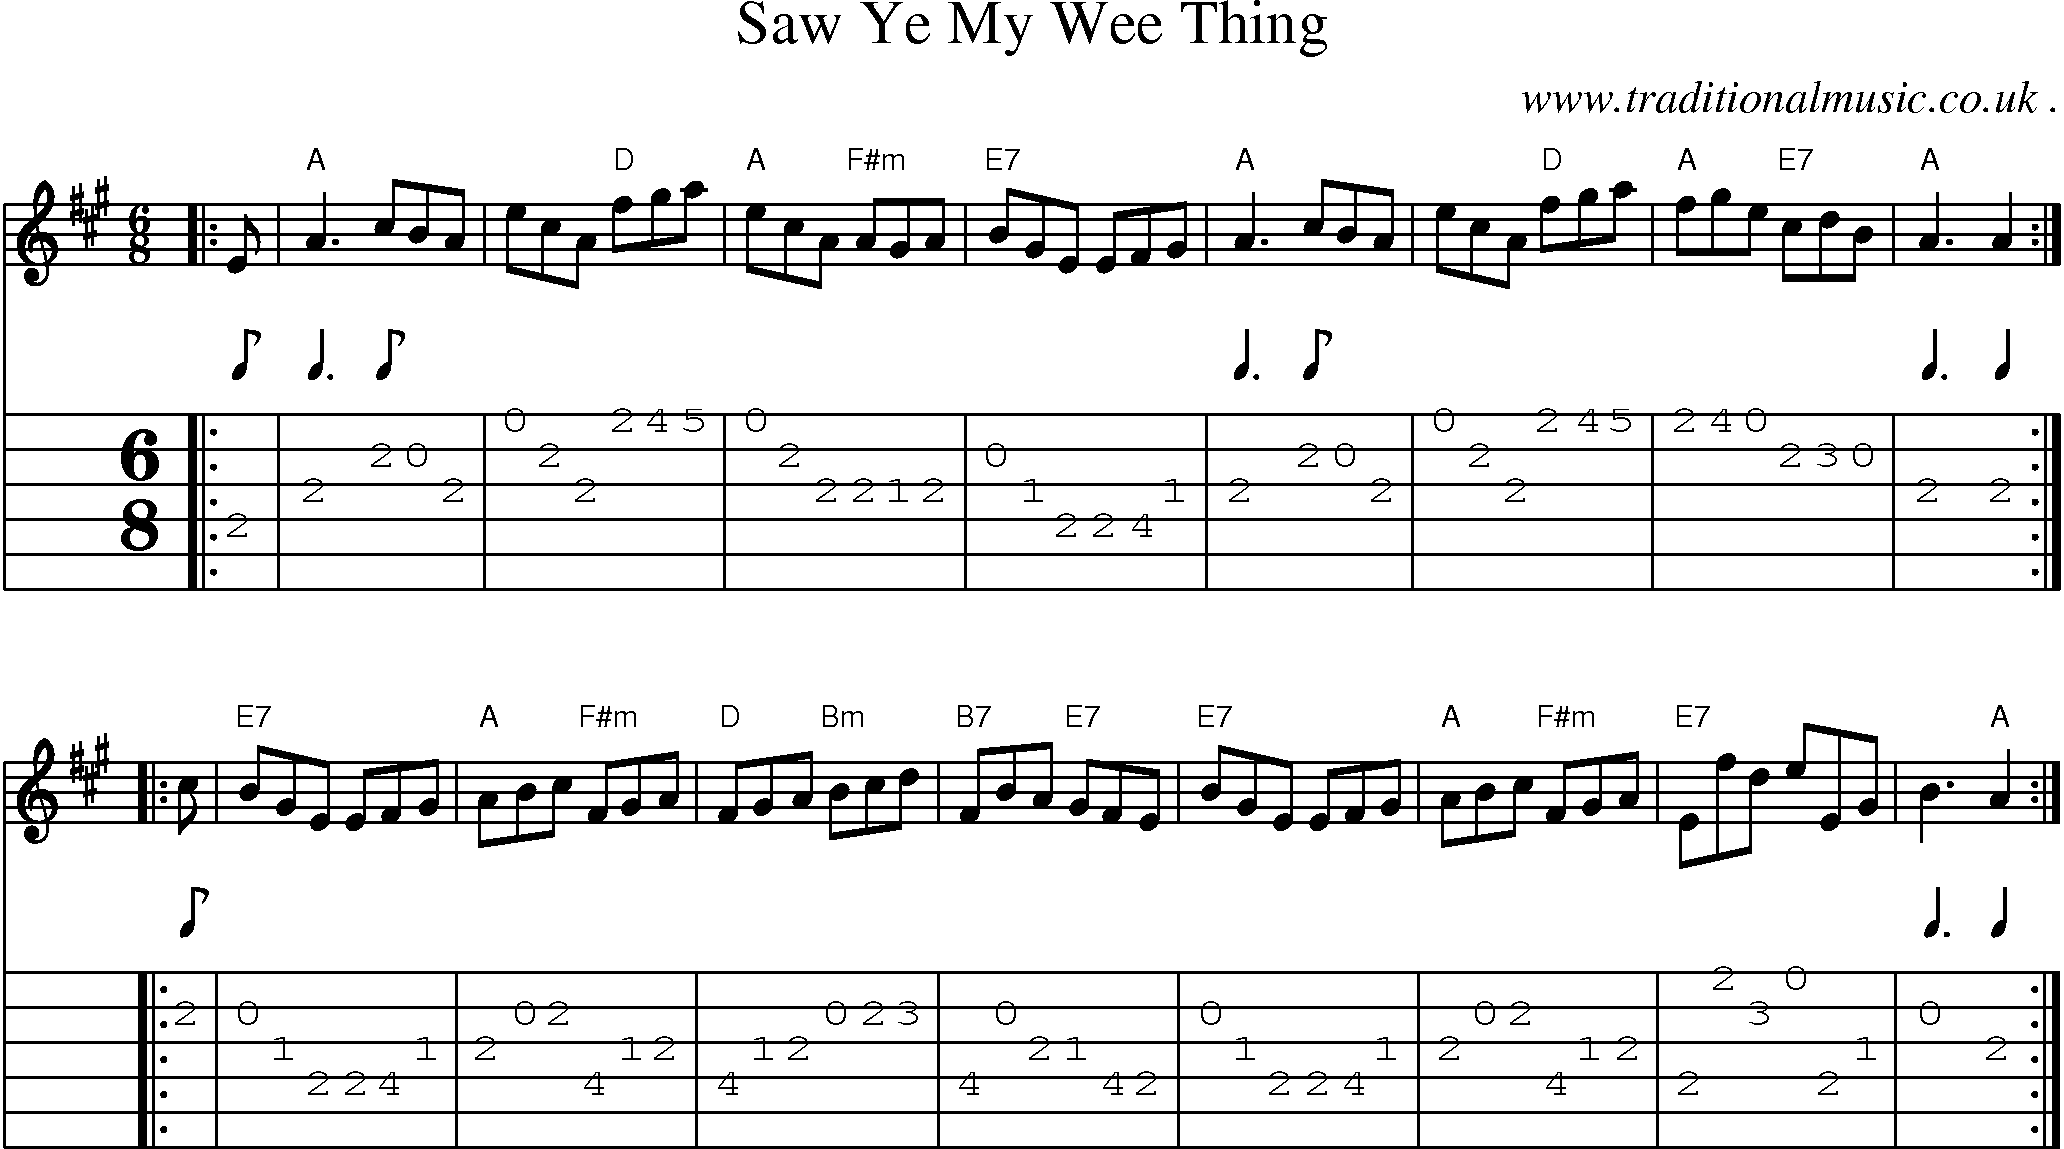 Sheet-music  score, Chords and Guitar Tabs for Saw Ye My Wee Thing